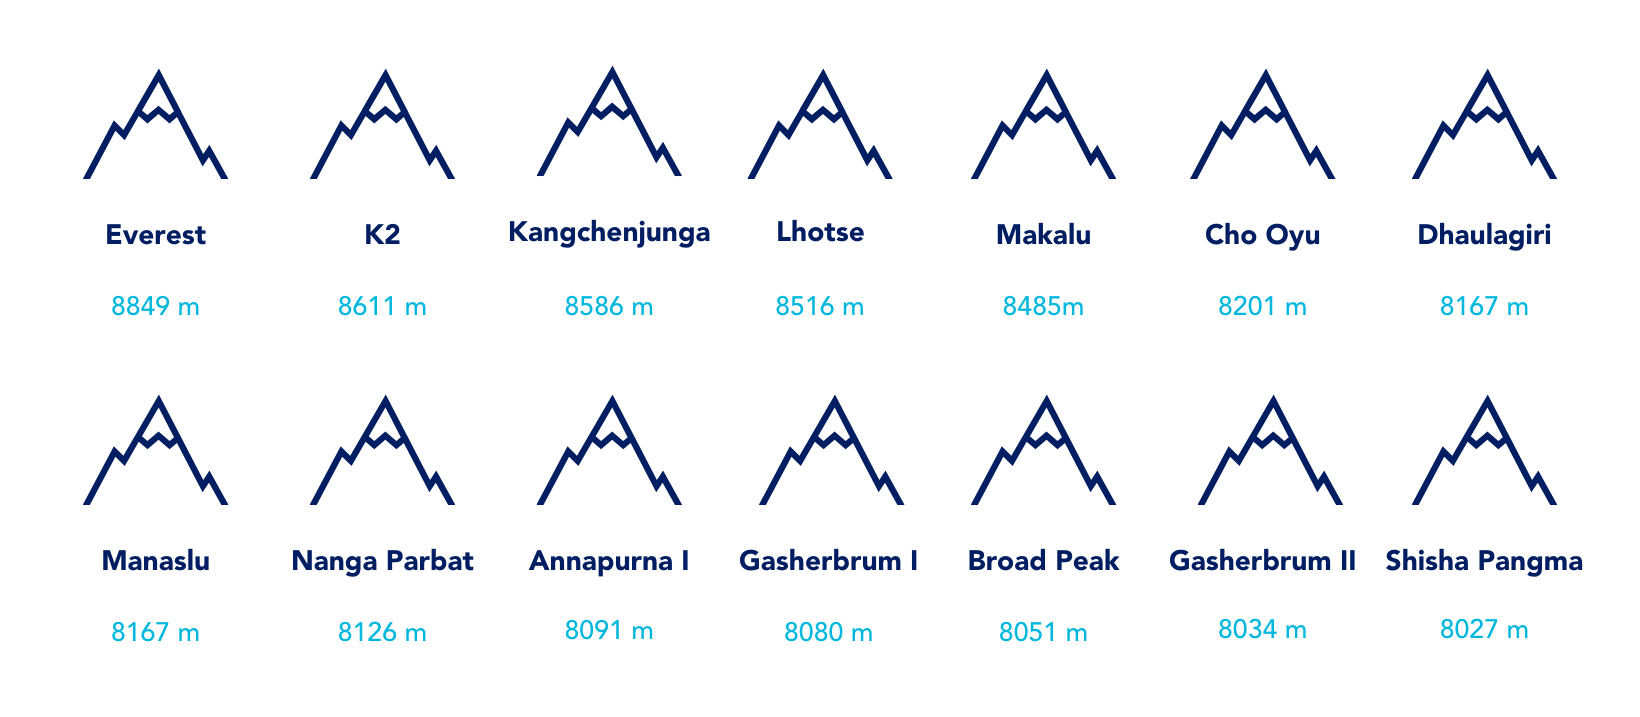 14 x 8000 metres - The 14 highest mountains in the world 